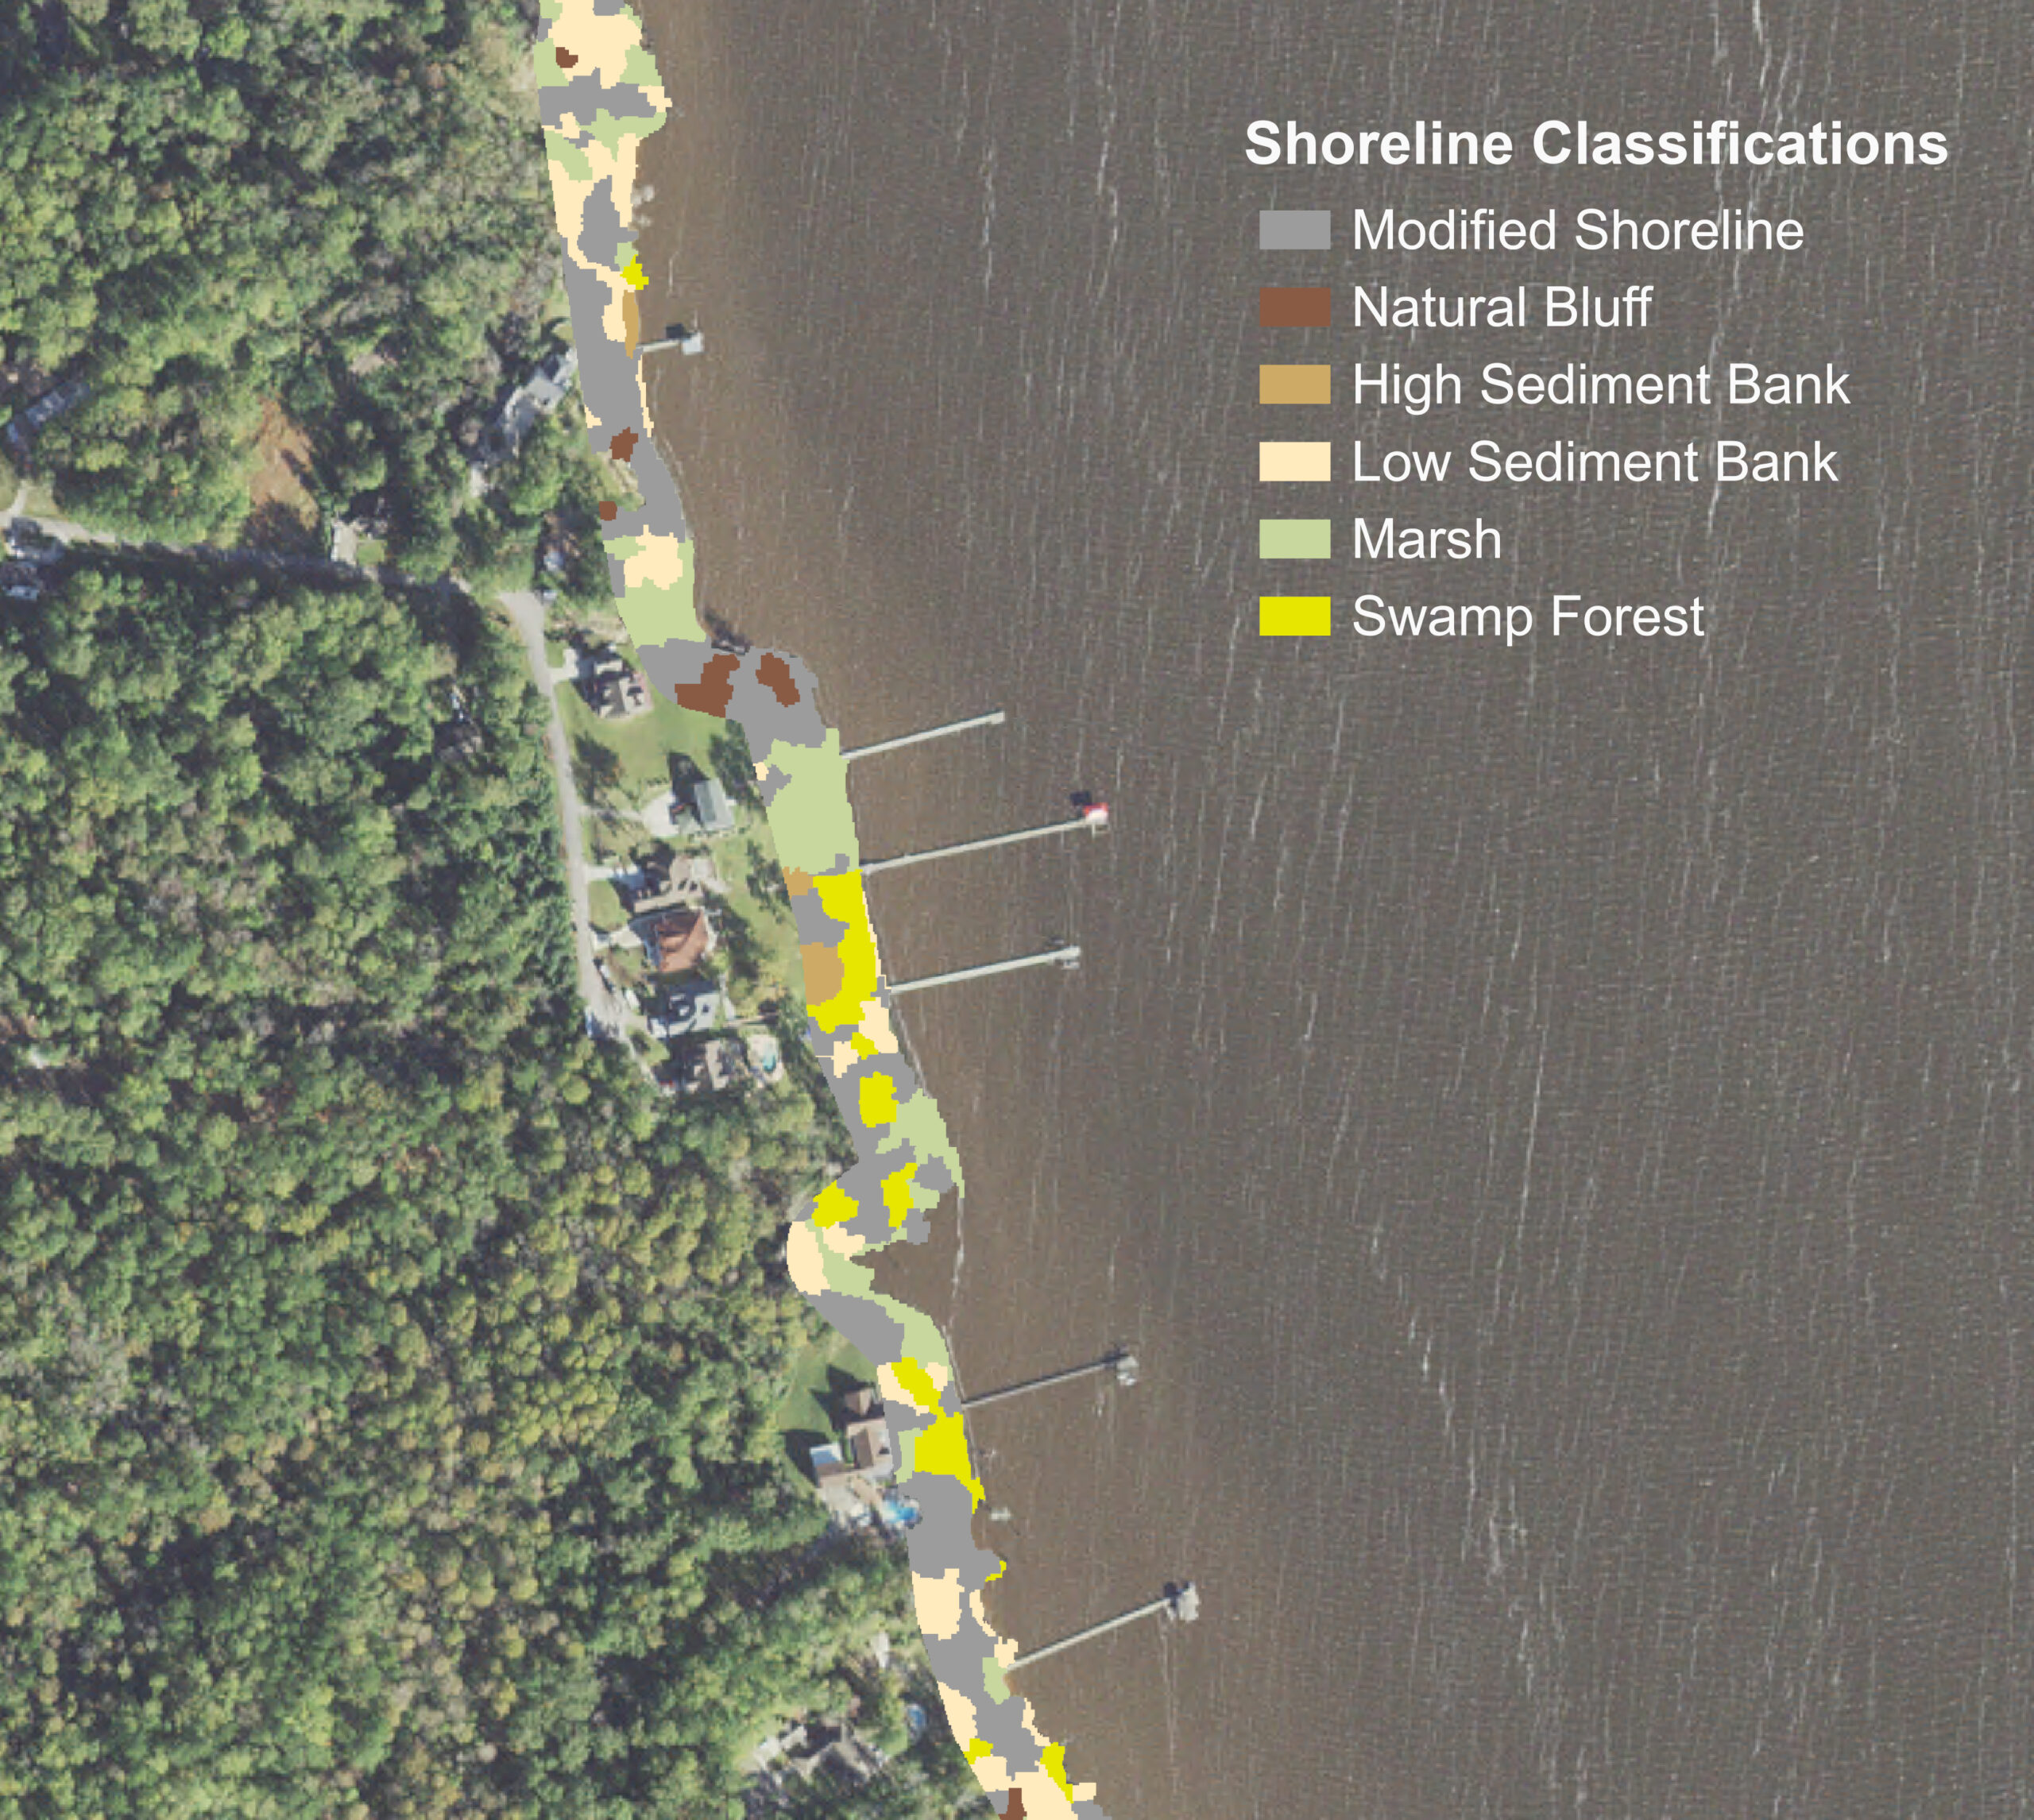 Aerial picture of south Neuse River Estuary overlaid with shoreline classifications: modified shoreline, natural bluff, high sediment bank, low sediment bank, marsh, swamp forest